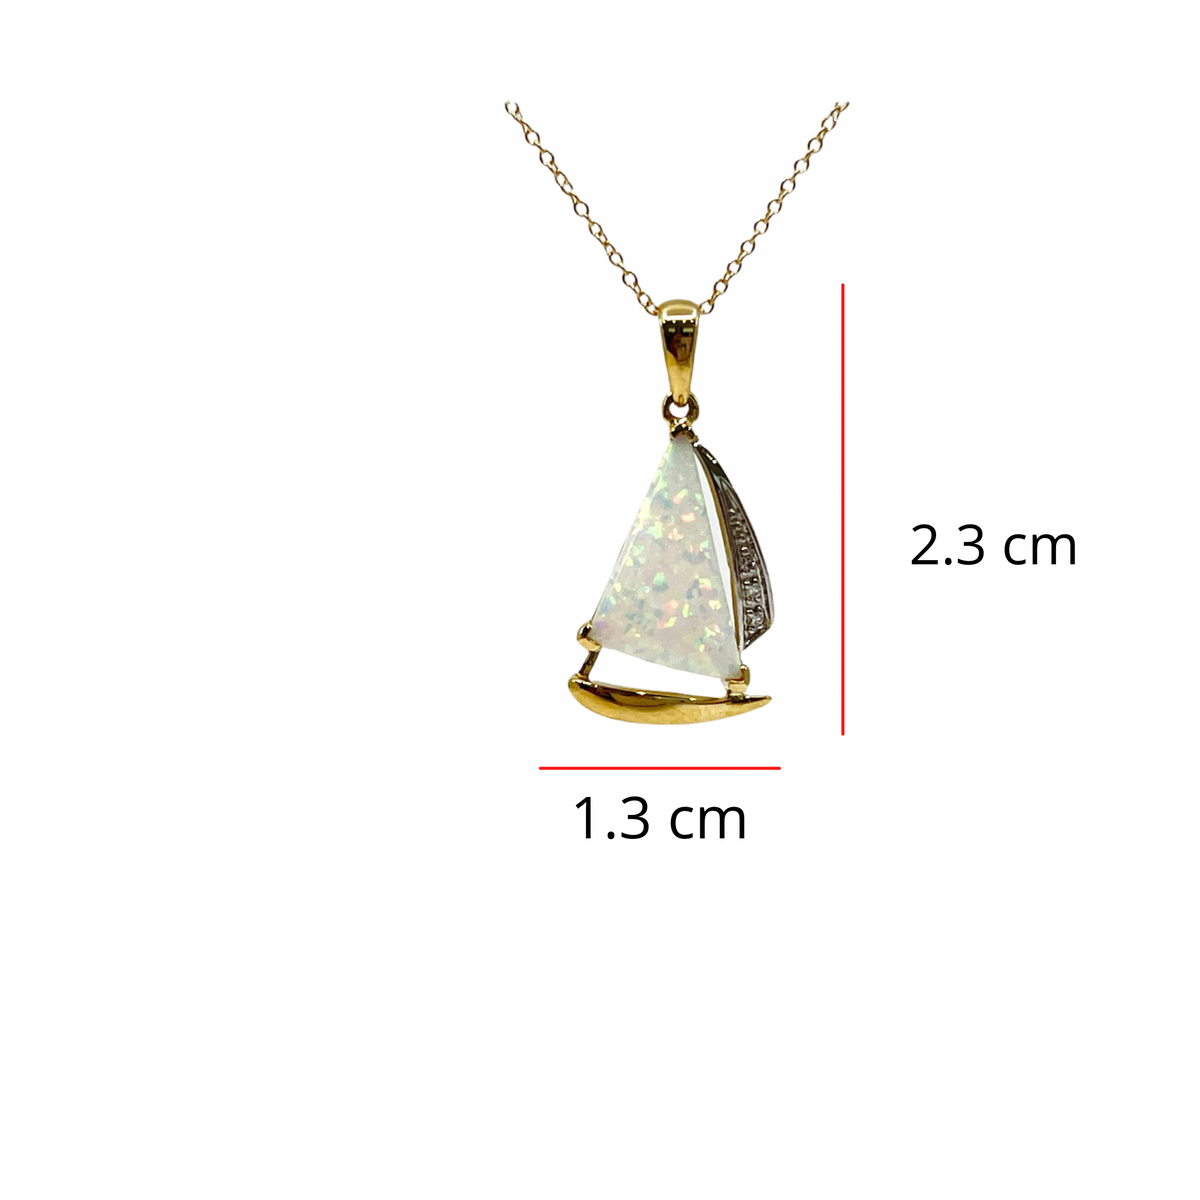 10K Yellow Gold Sail Boat Shaped Created Opal and 0.015cttw Diamond Necklace - 18 Inches